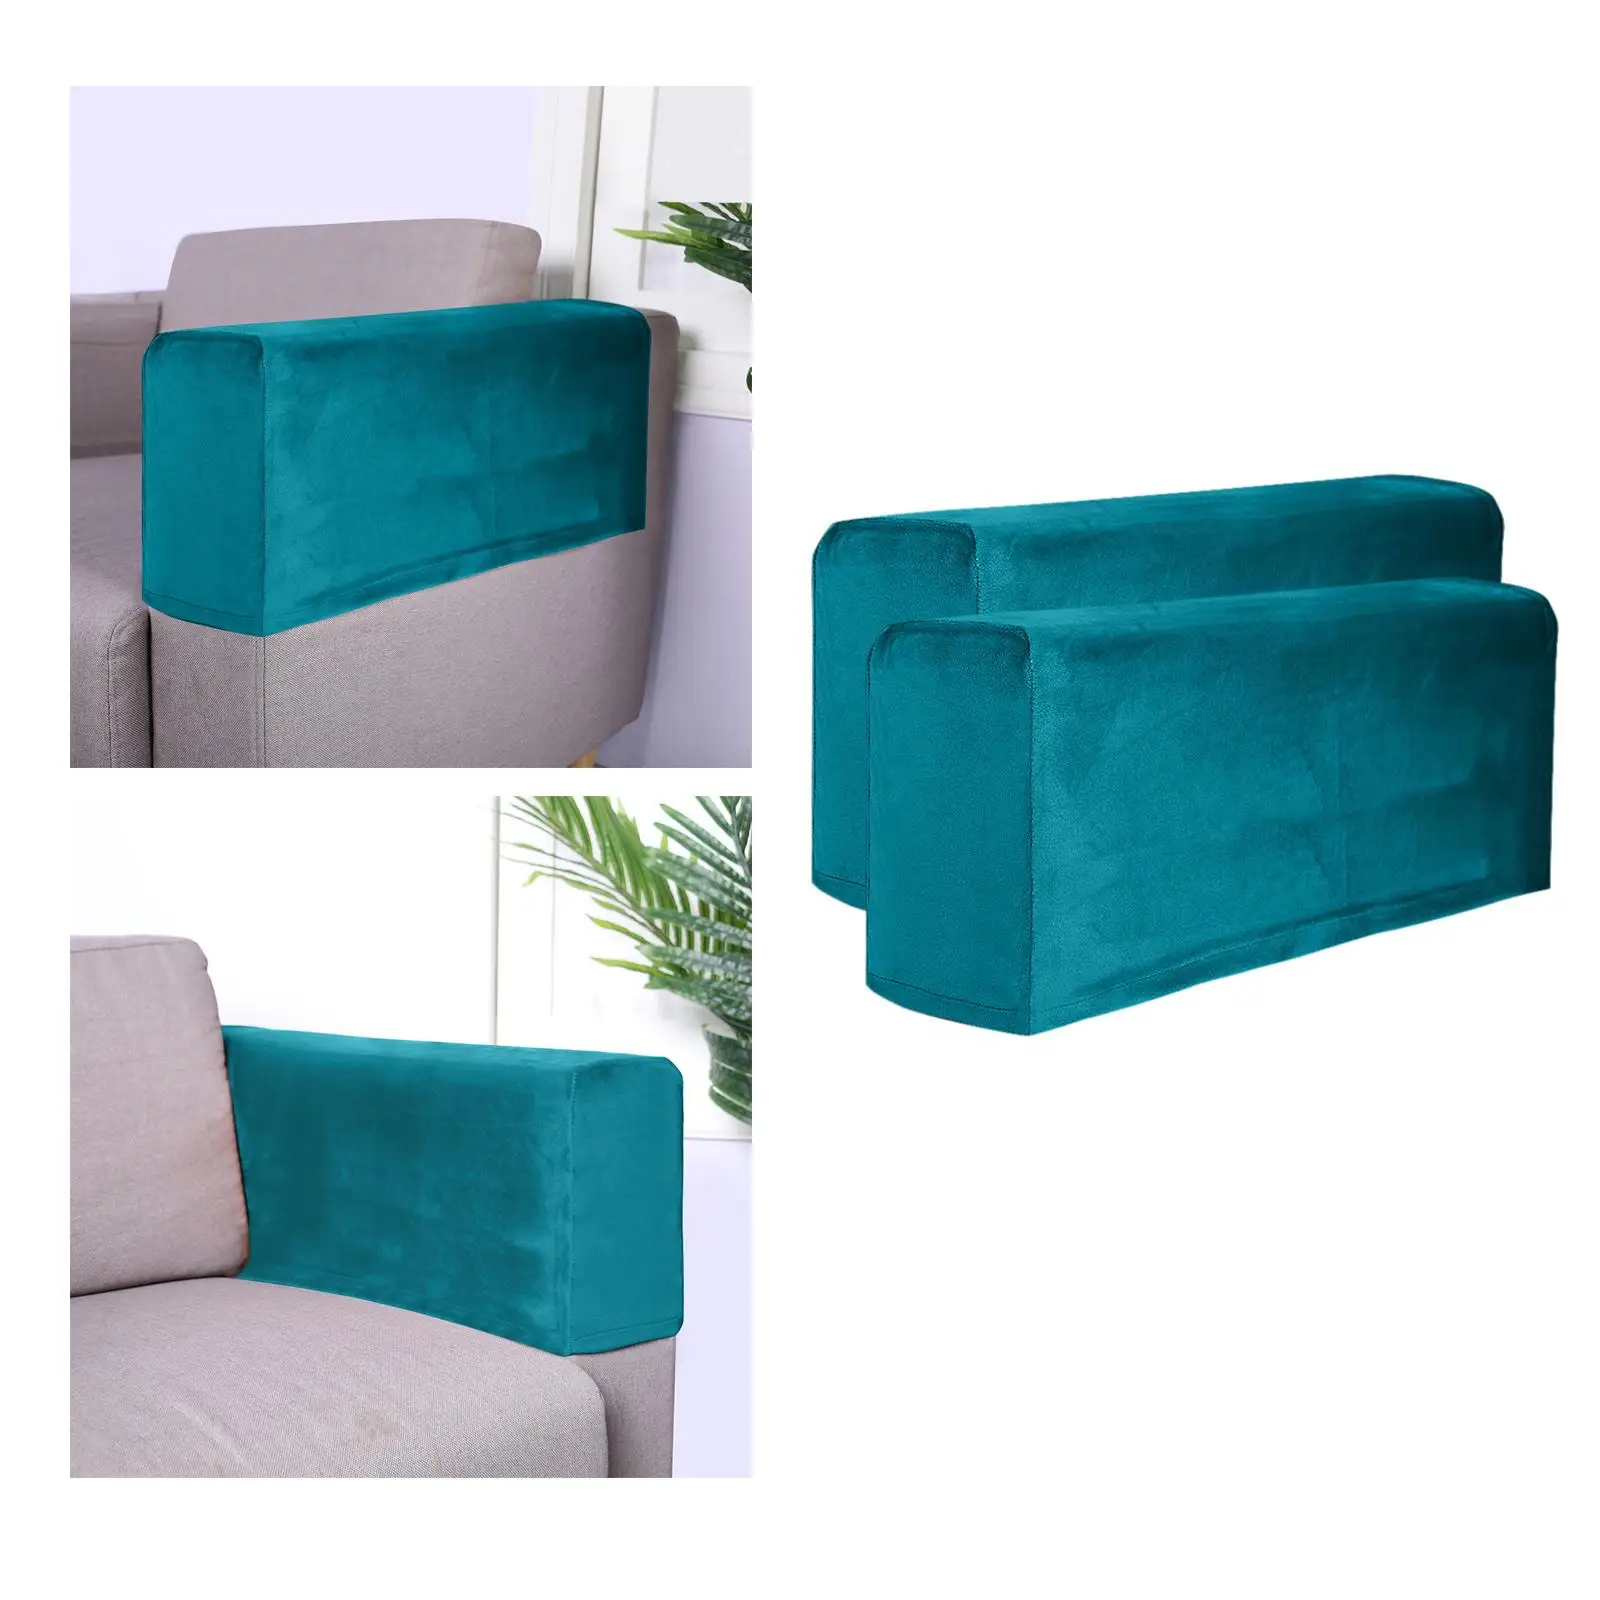 2pcs Sofa Armrest Cover Thickened Polyester Stretchy Chair Armrest Slipcover for Living Room